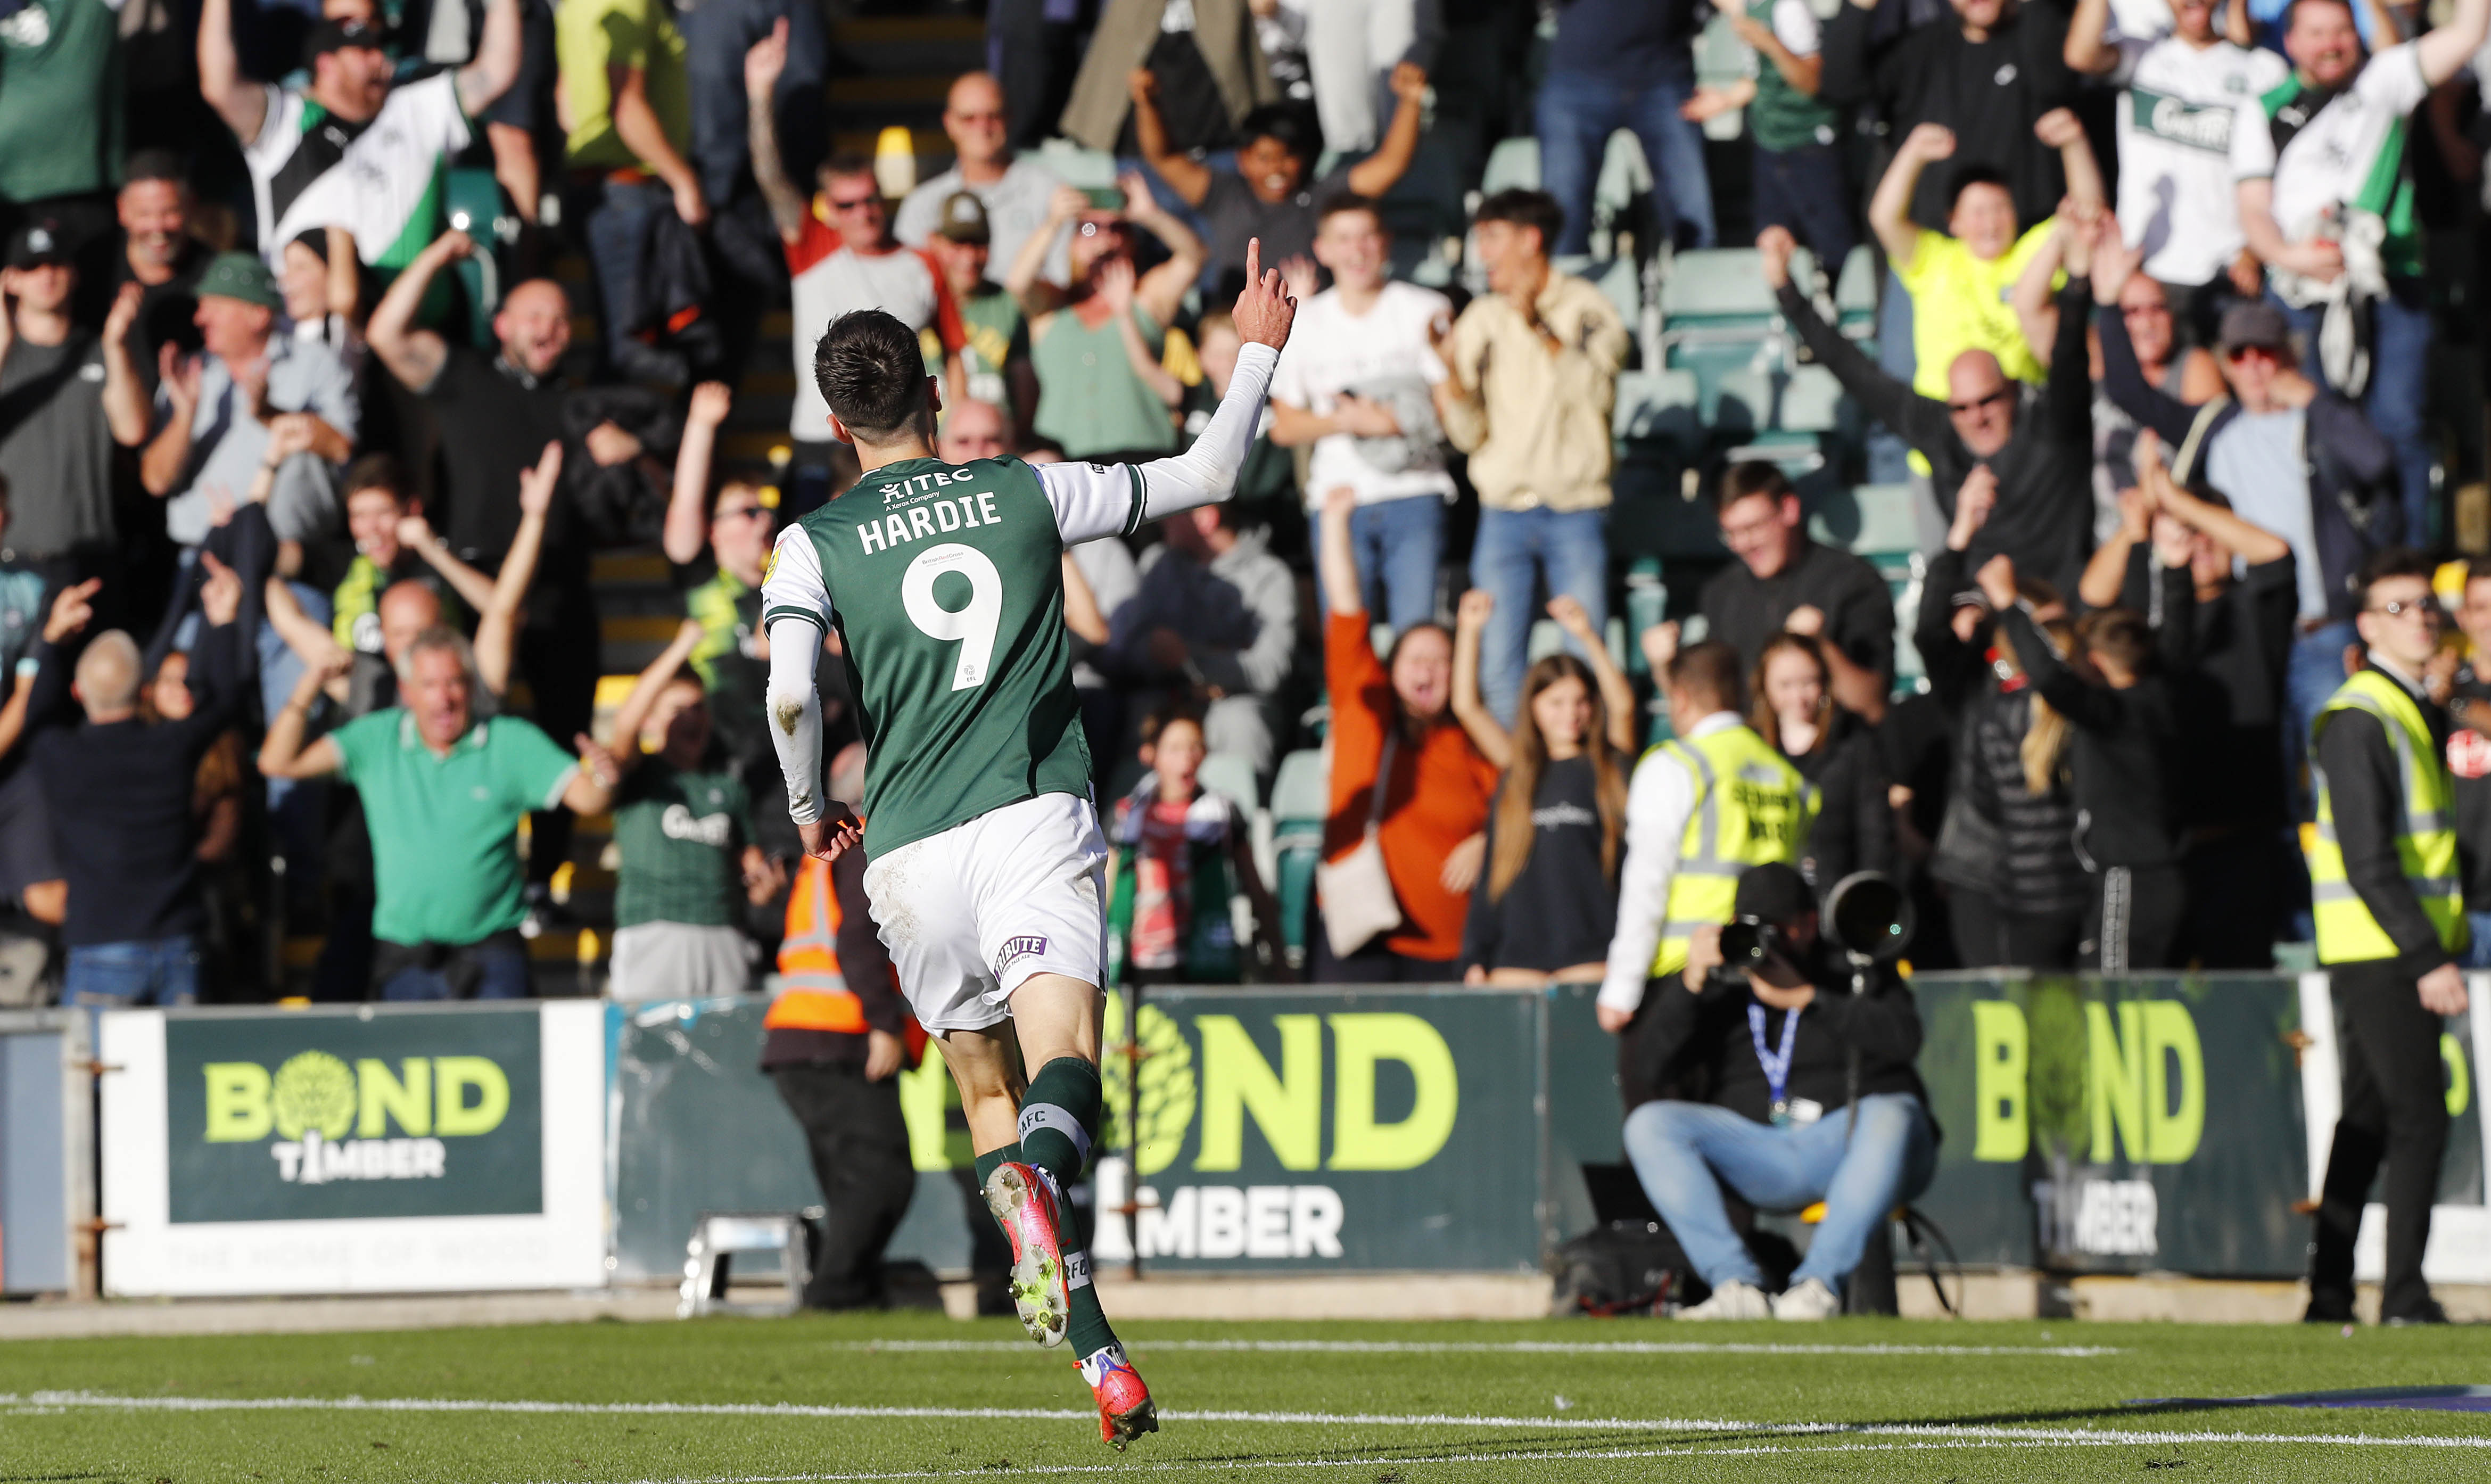 Ryan Hardie celebrates in front of Bond Timber advertising at Home Park